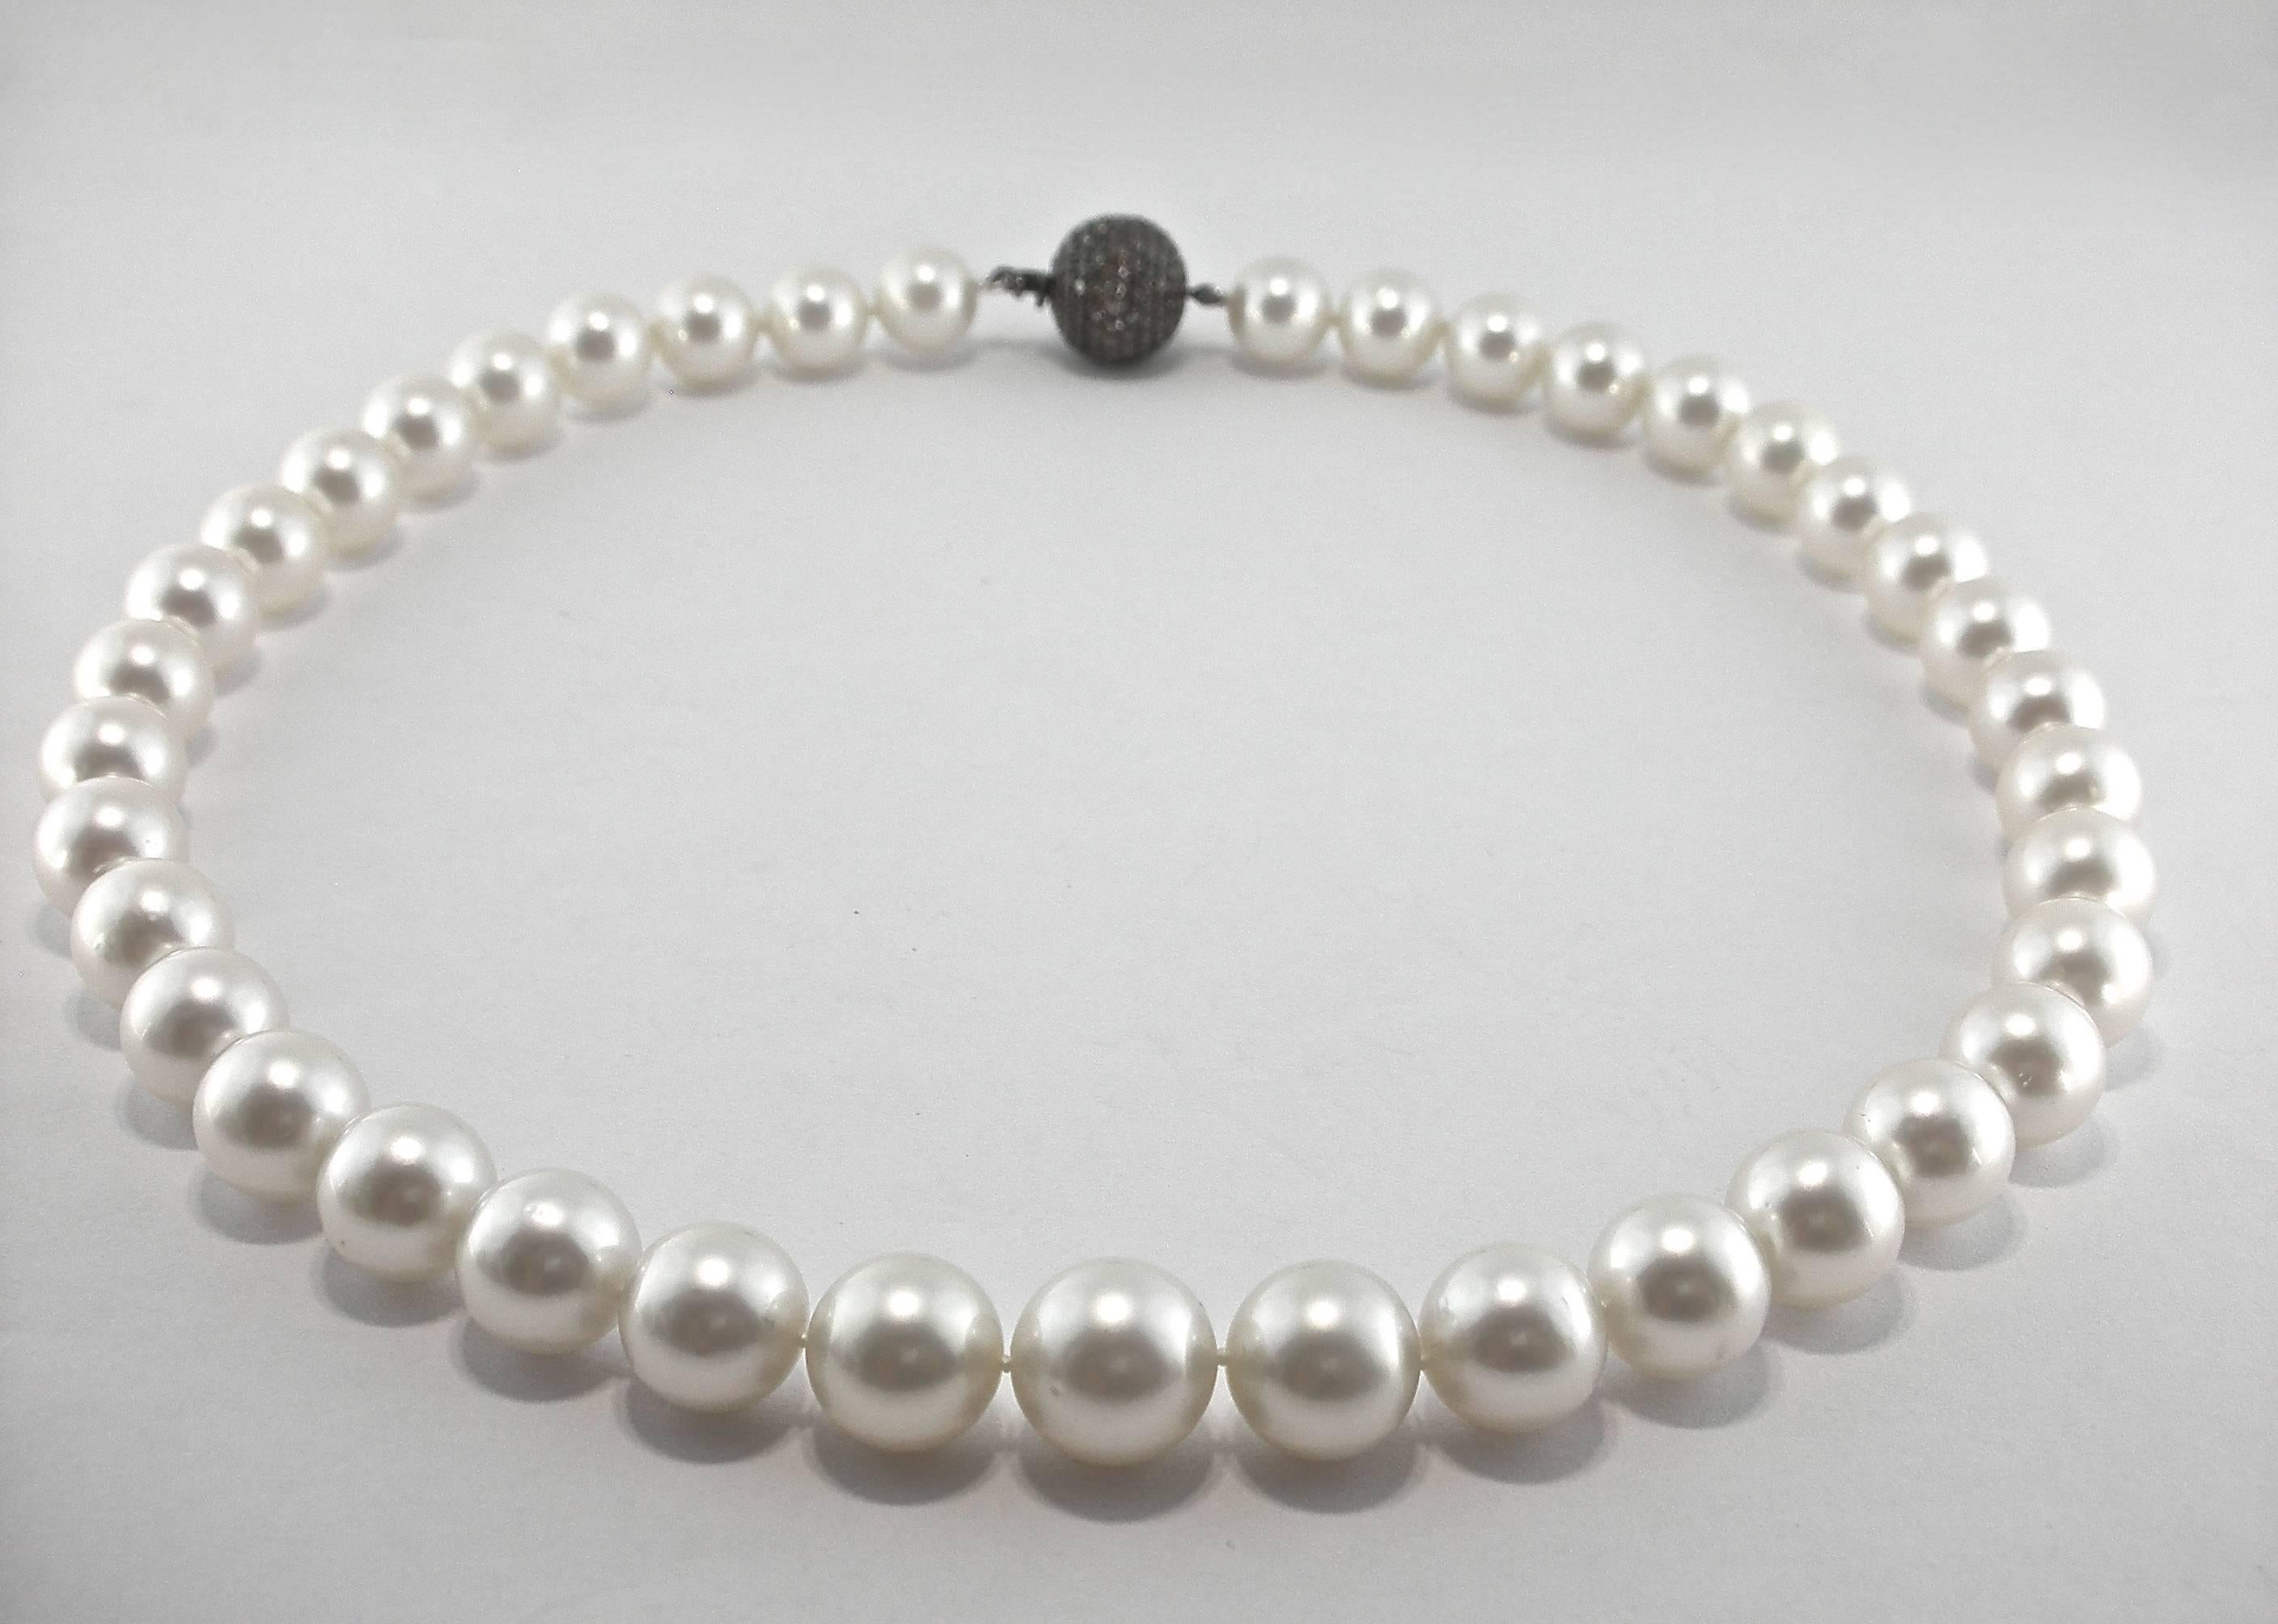 Jona South Sea pearl necklace ( total length 18.5 inch/47 cm), composed of 39 cultured South Sea pearls ranging from  10.2 to 12.7 mm in diameter, strung on a hand-knotted silk cord and secured by a brown diamond pavé ball clasp (212 pieces, ct.